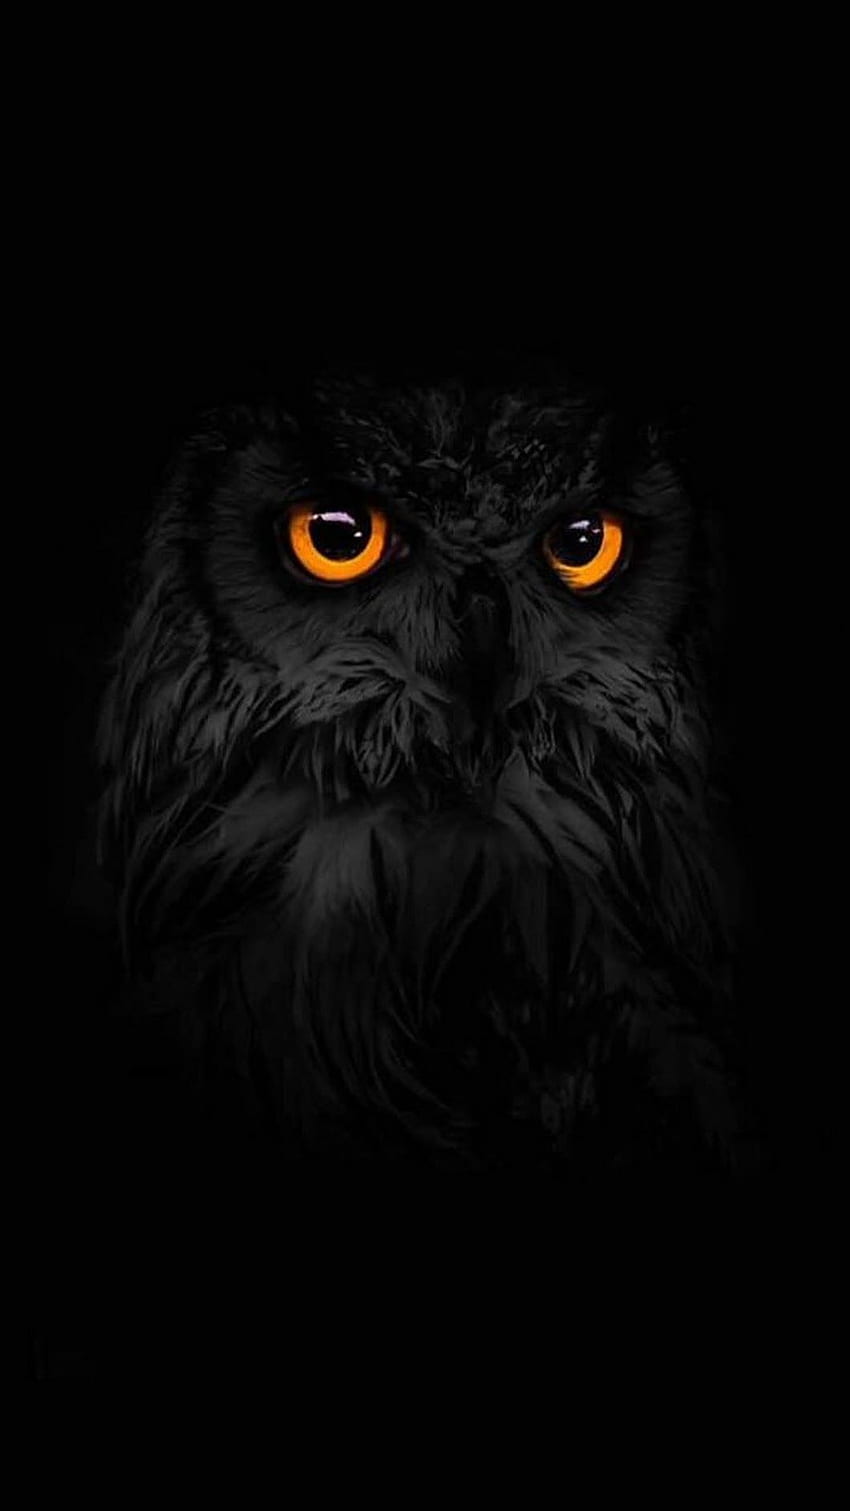 Wallpaper Brown and Black Owl in Close up Photography, Background -  Download Free Image